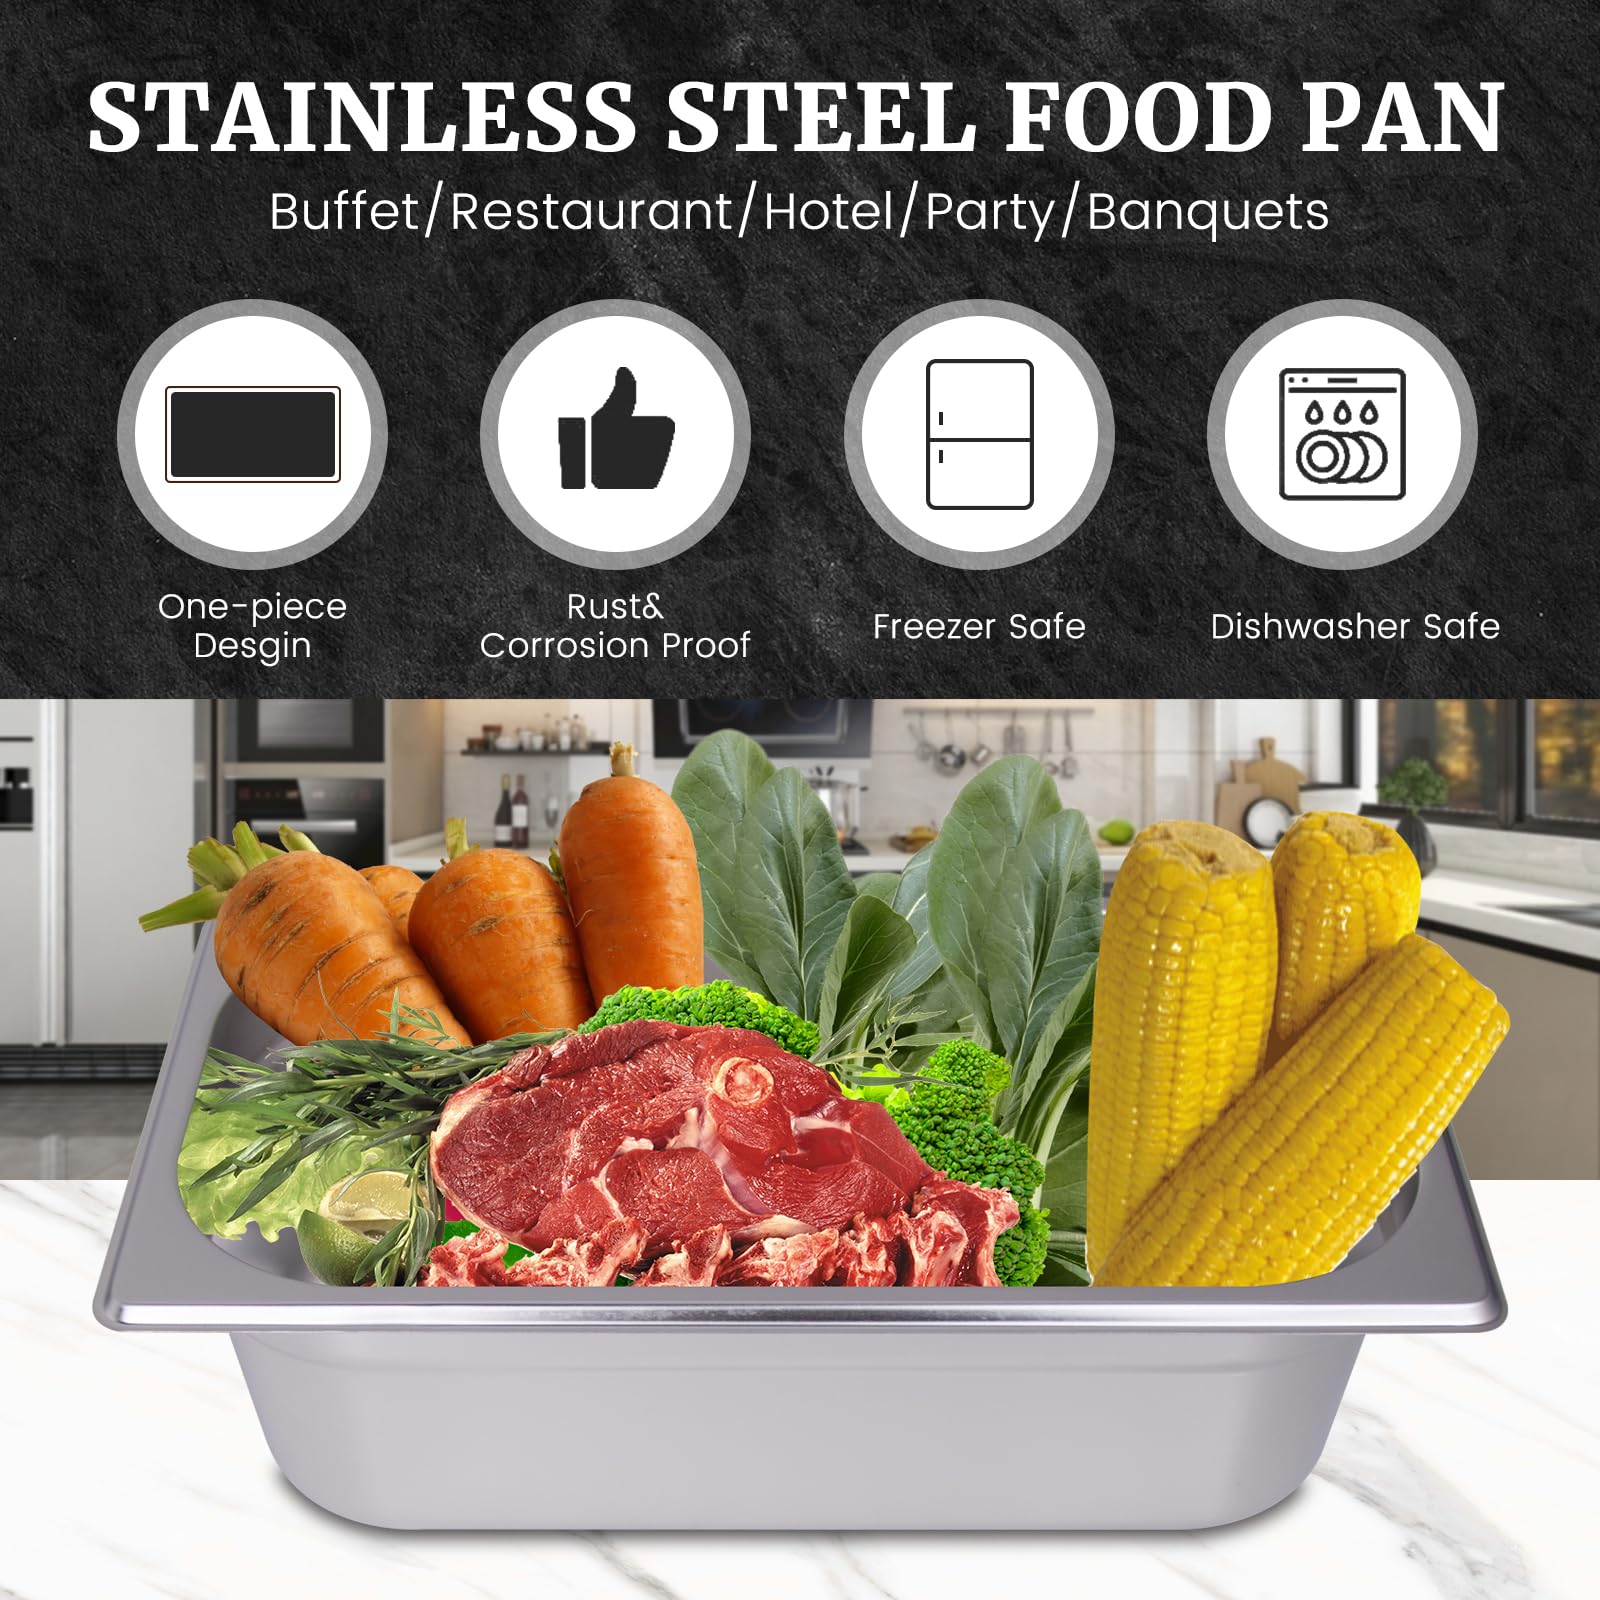 Hakka 6-Pack Hotel Pans Steam Table Pan 1/3 Size Hotel Pan 4" Deep Stainless Steel Pan for Party, Restaurant, Hotel